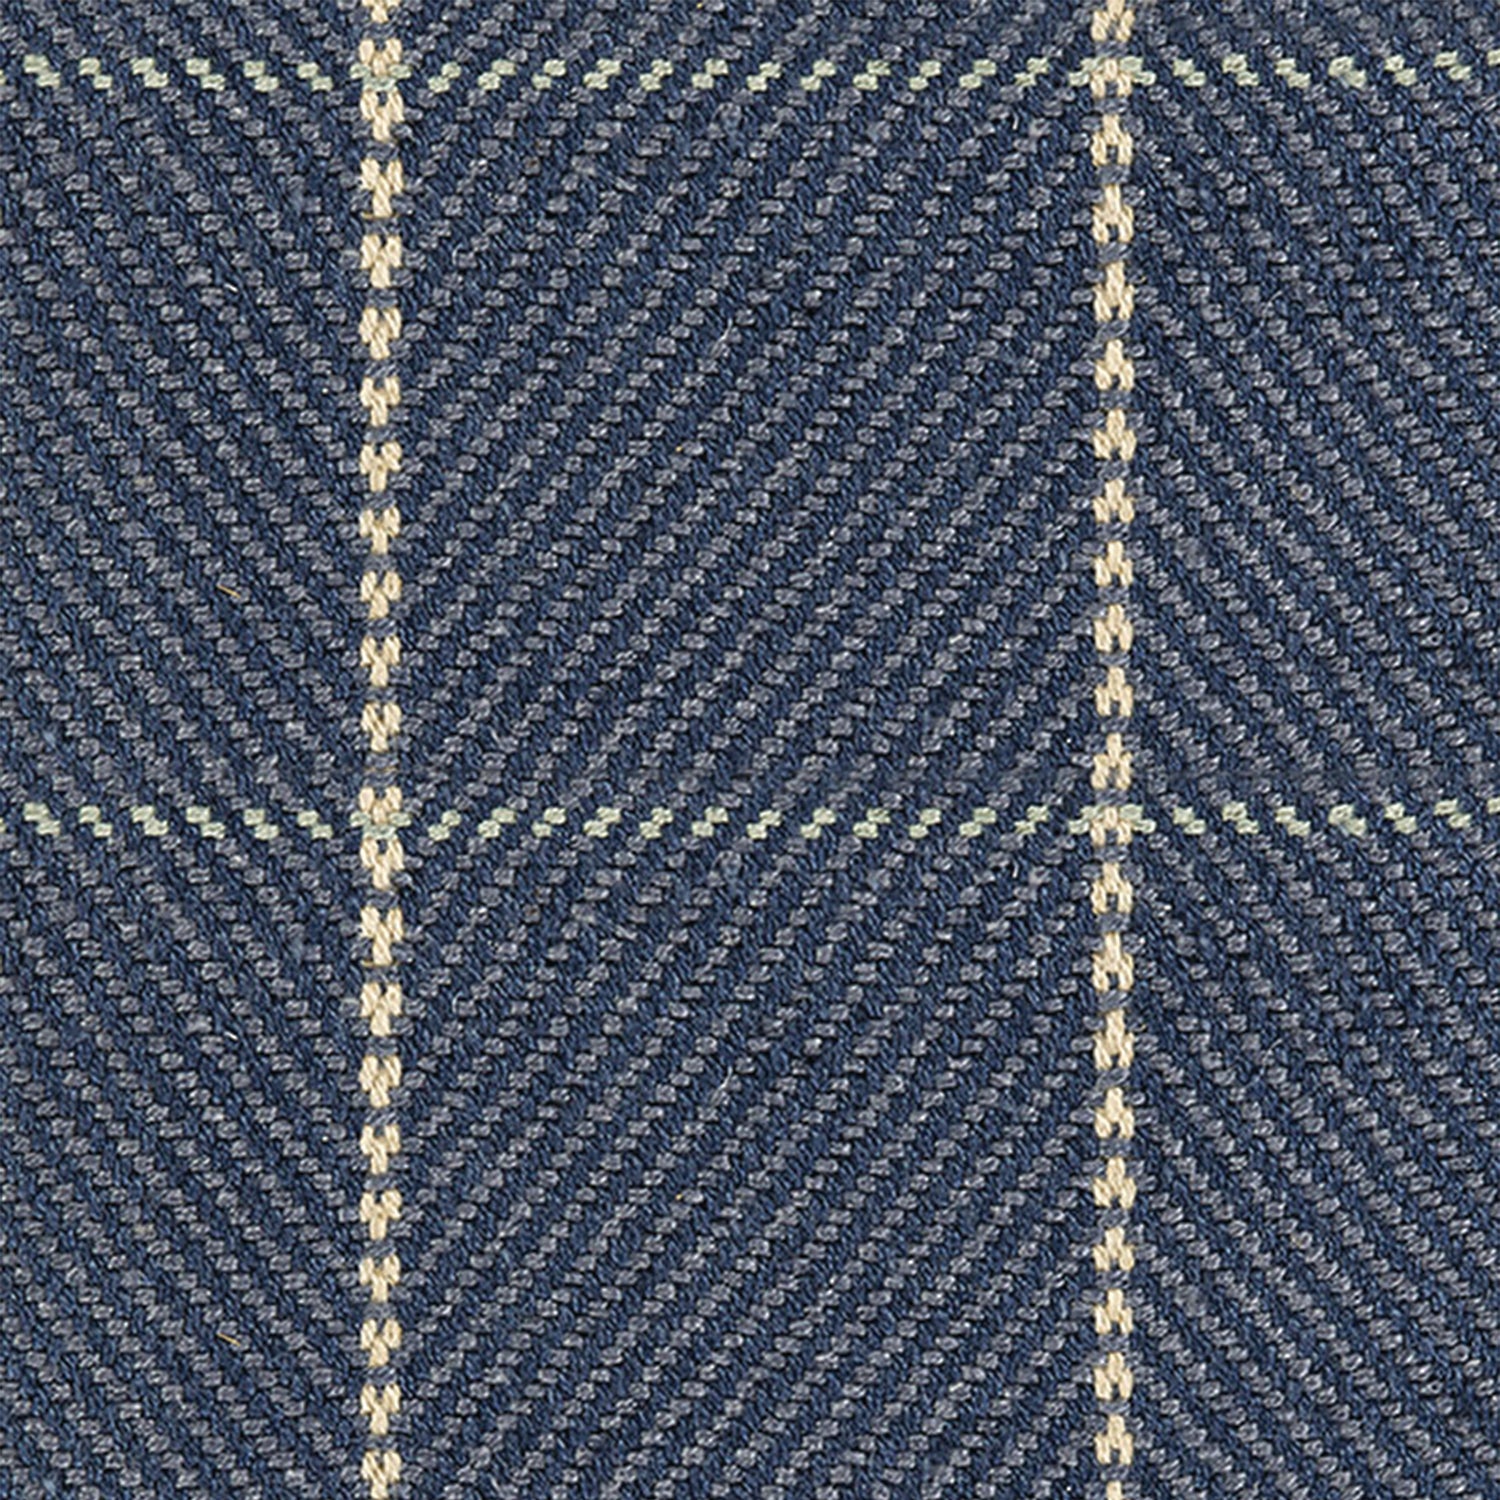 Outdoor broadloom carpet swatch in a plaid weave in shades of cream, blue and navy.